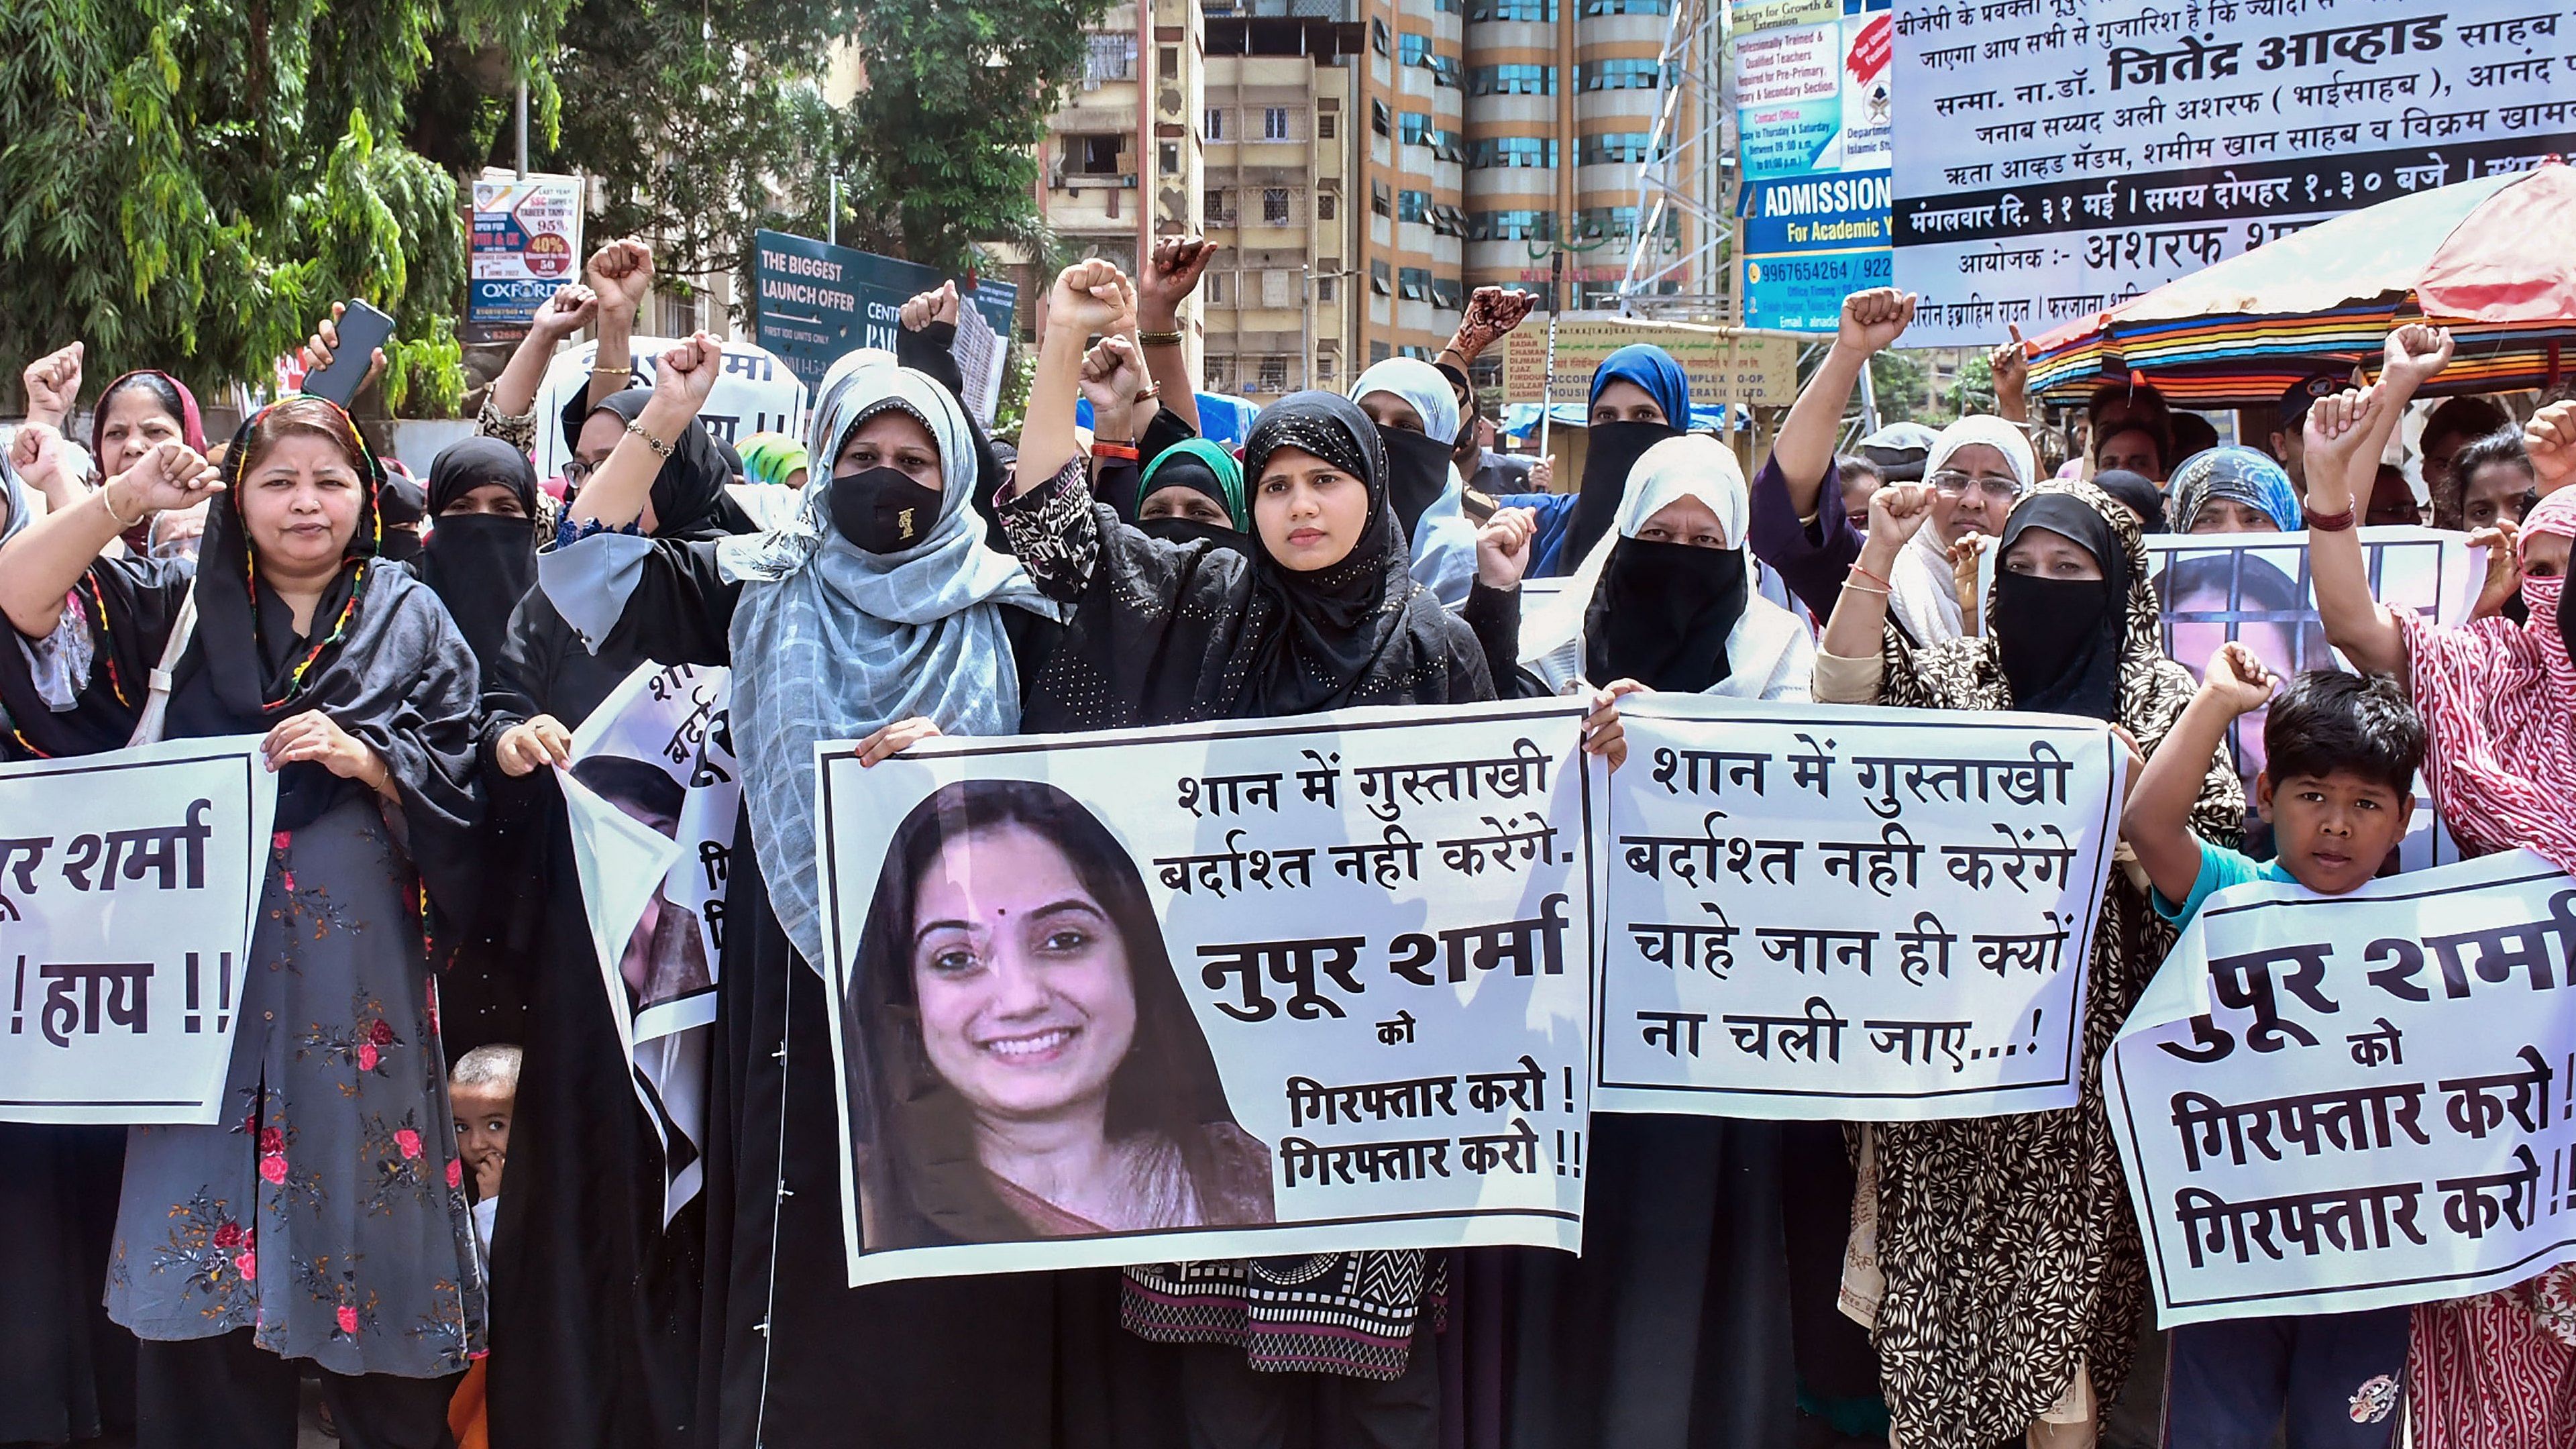 Women from the Muslim community shout slogans during their protest against BJP spokesperson Nupur Sharma over her alleged remarks on Prophet Mohammed. Credit: PTI Photo